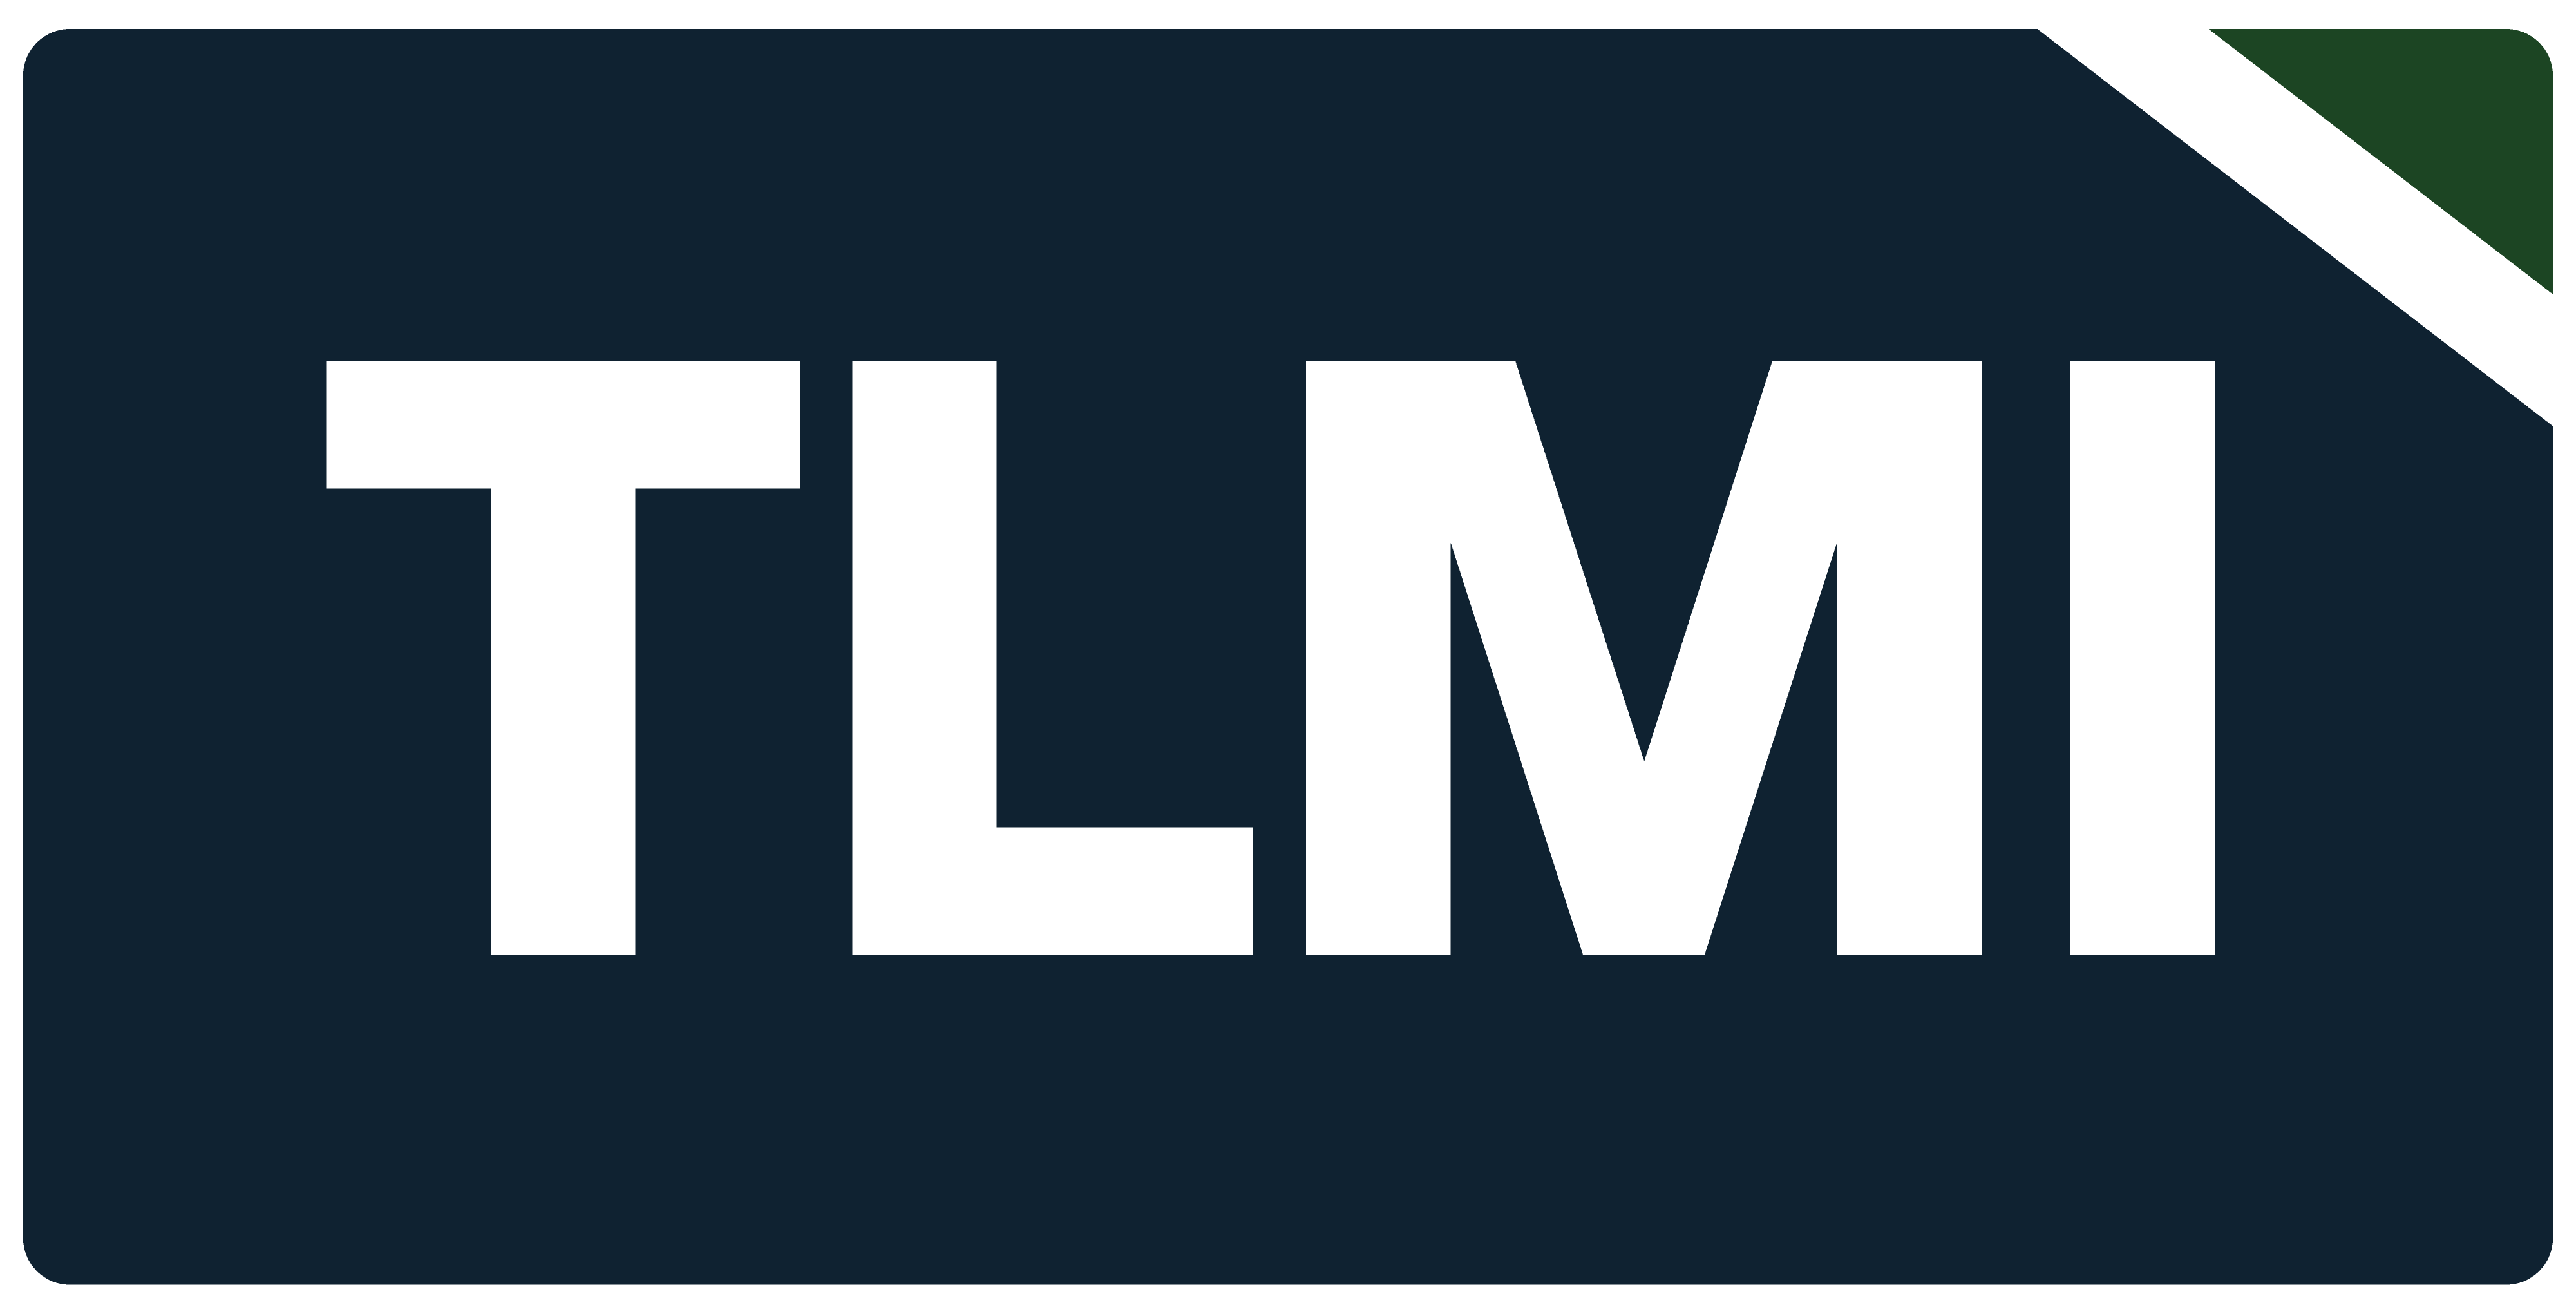 TLMI seeking submissions for 2022 Print Awards Competition